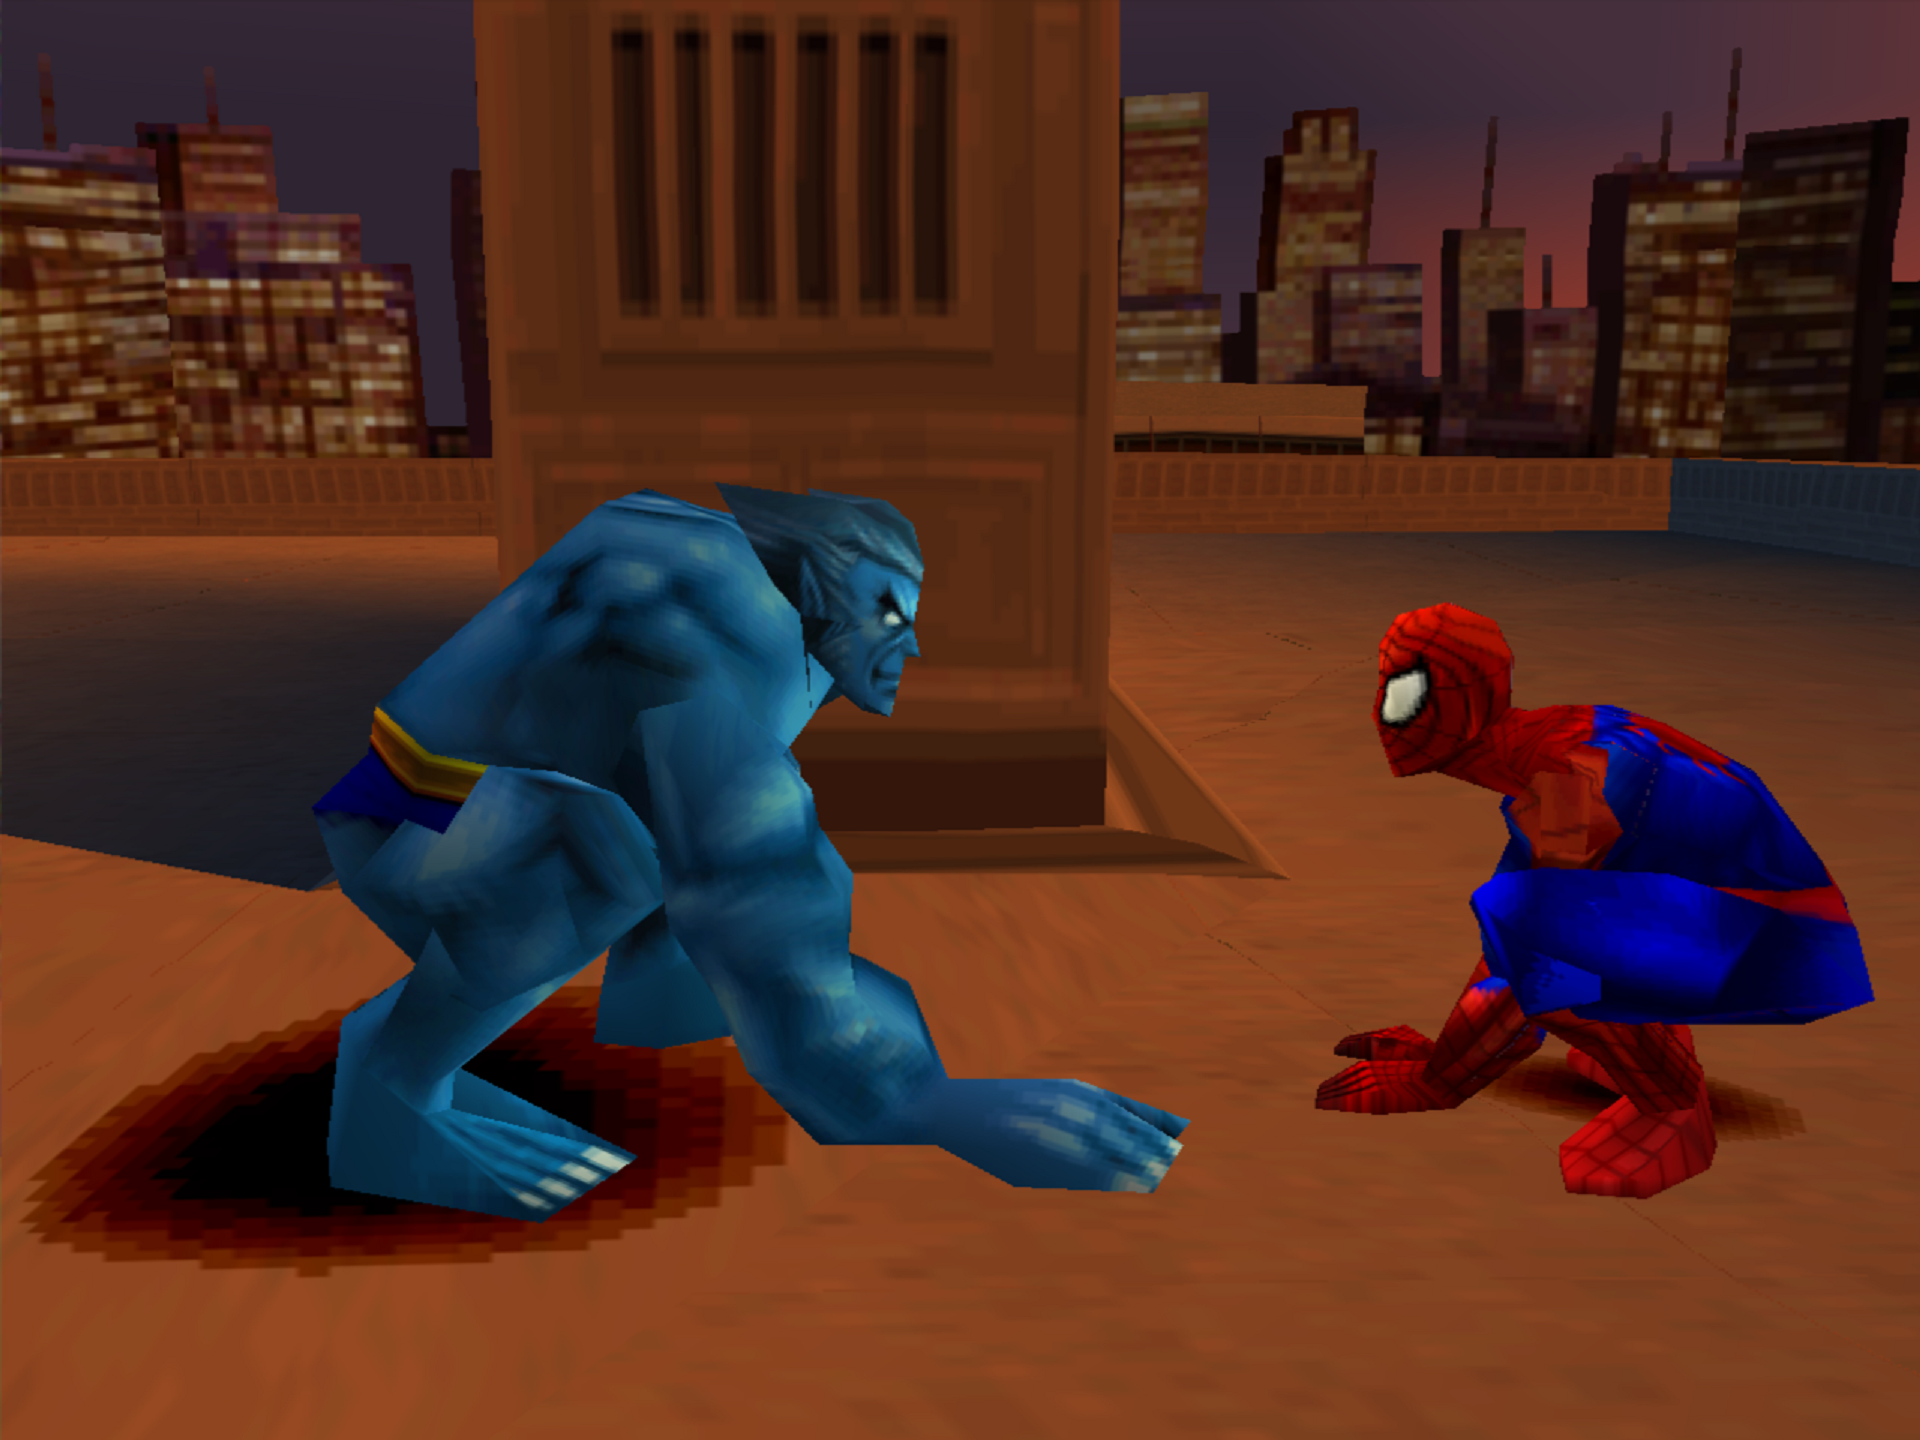 Spider-Man 2: Enter Electro screenshots, images and pictures - Giant Bomb